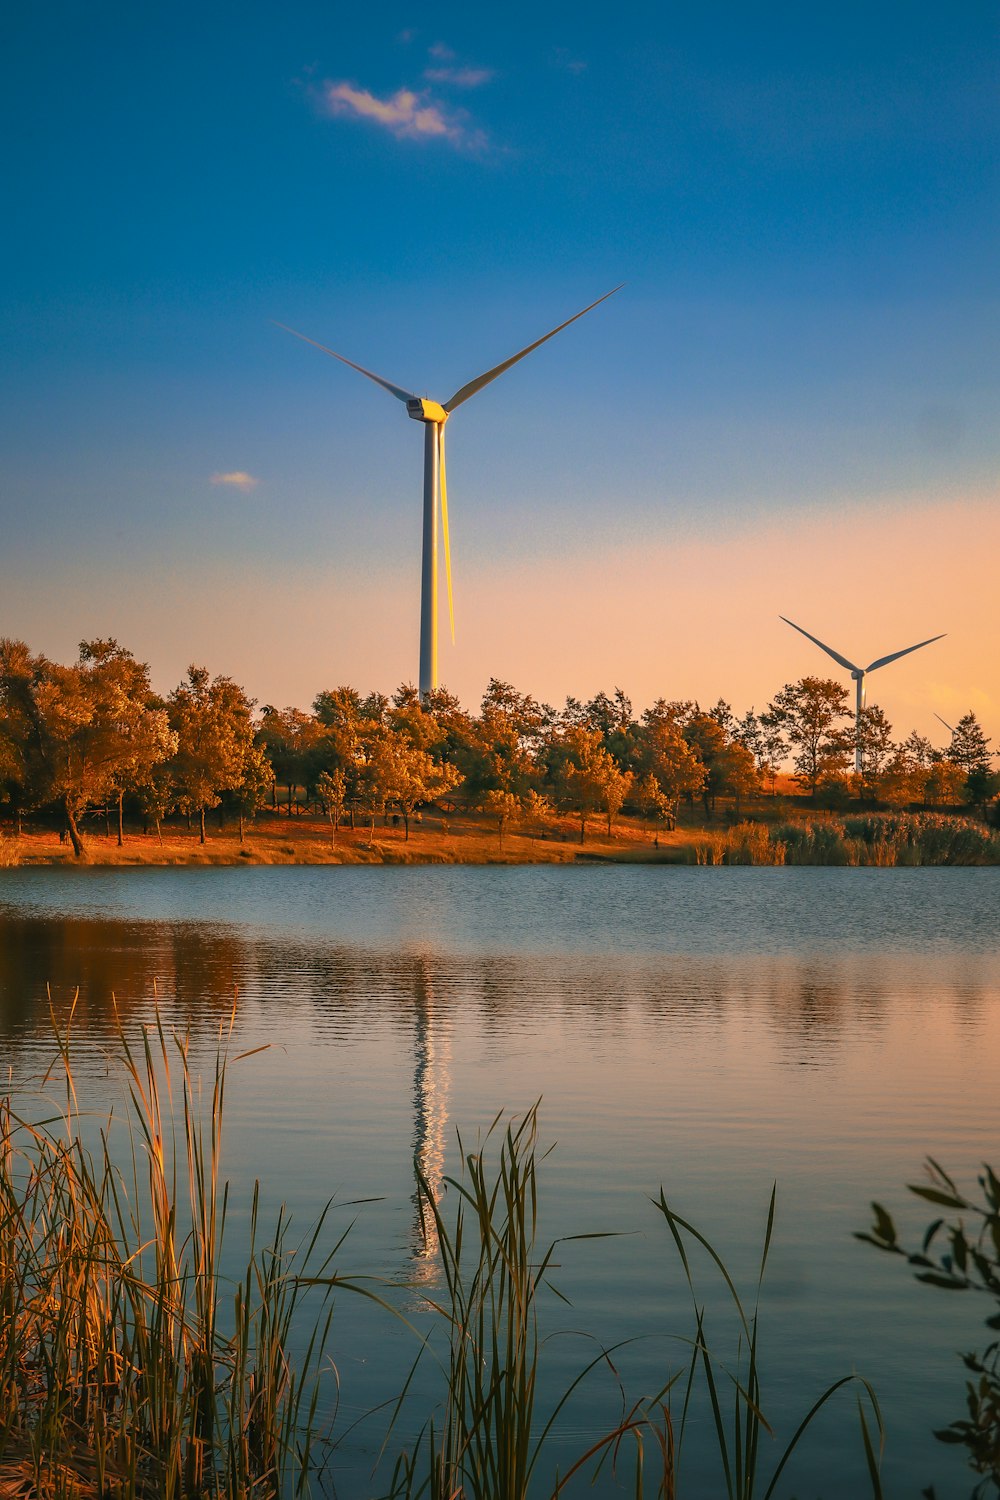 two wind turbines are seen in the distance over a lake